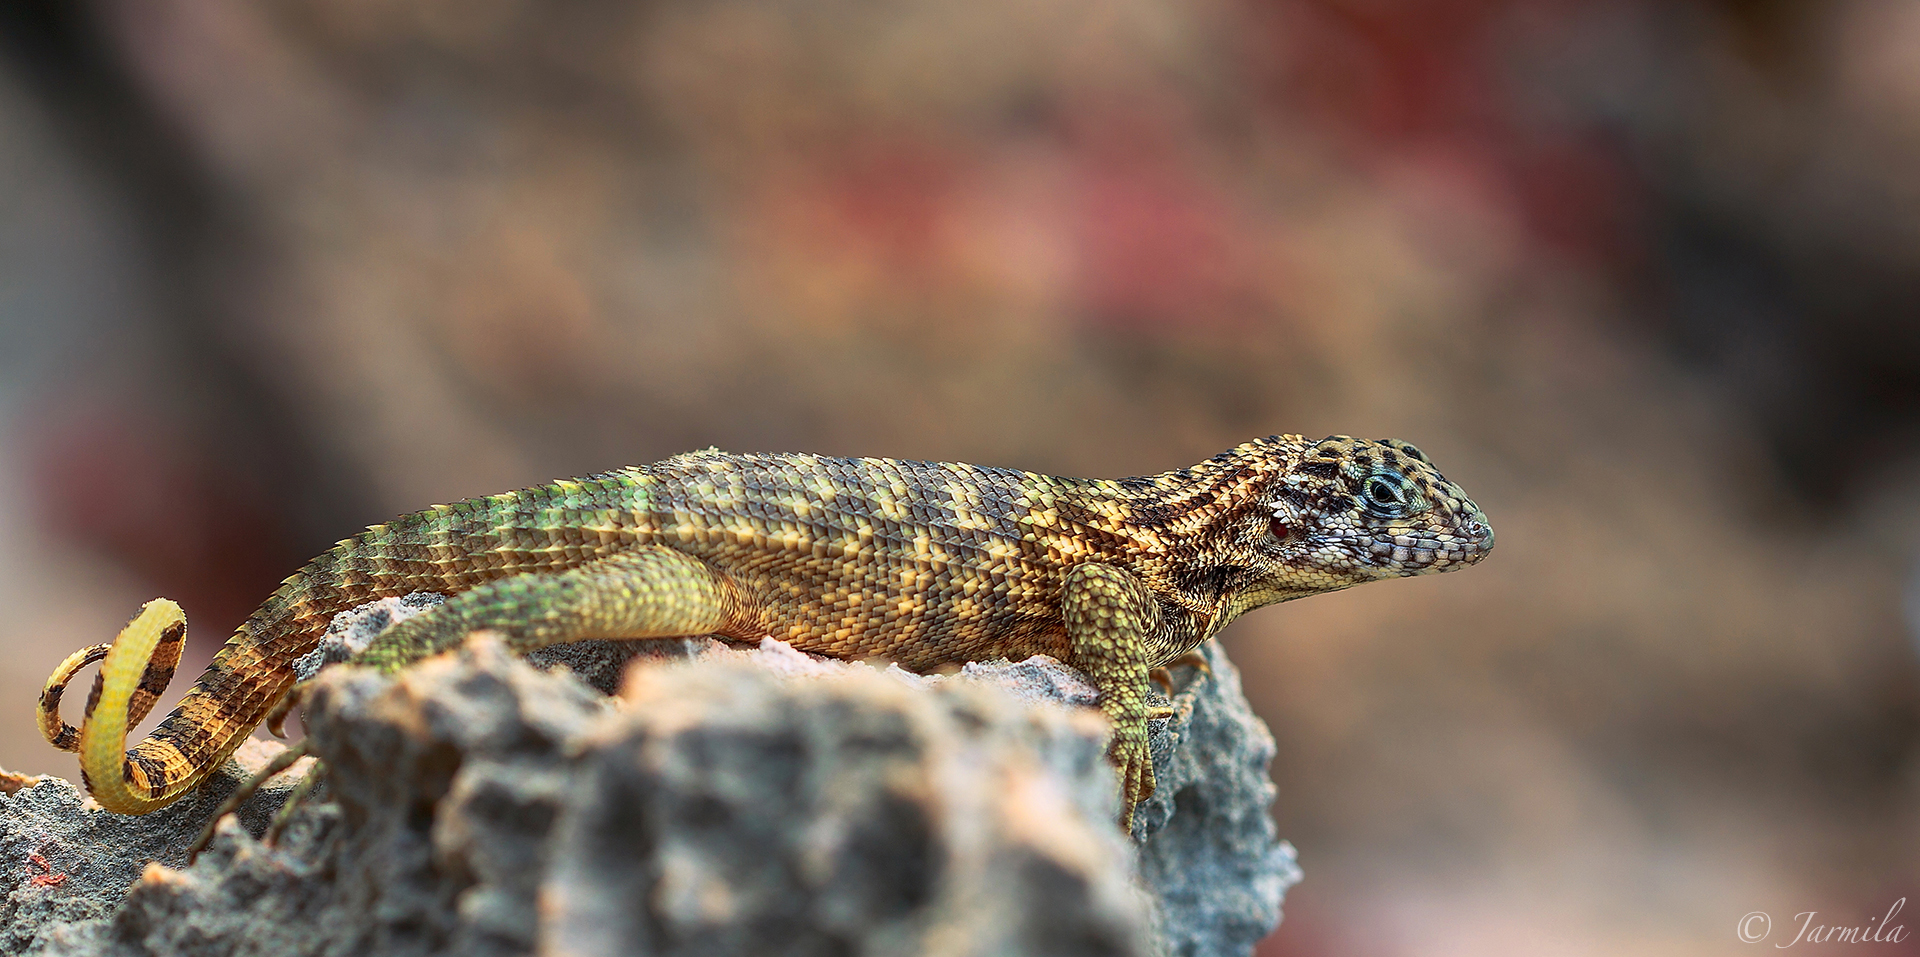 Small curly-tailed lizard...